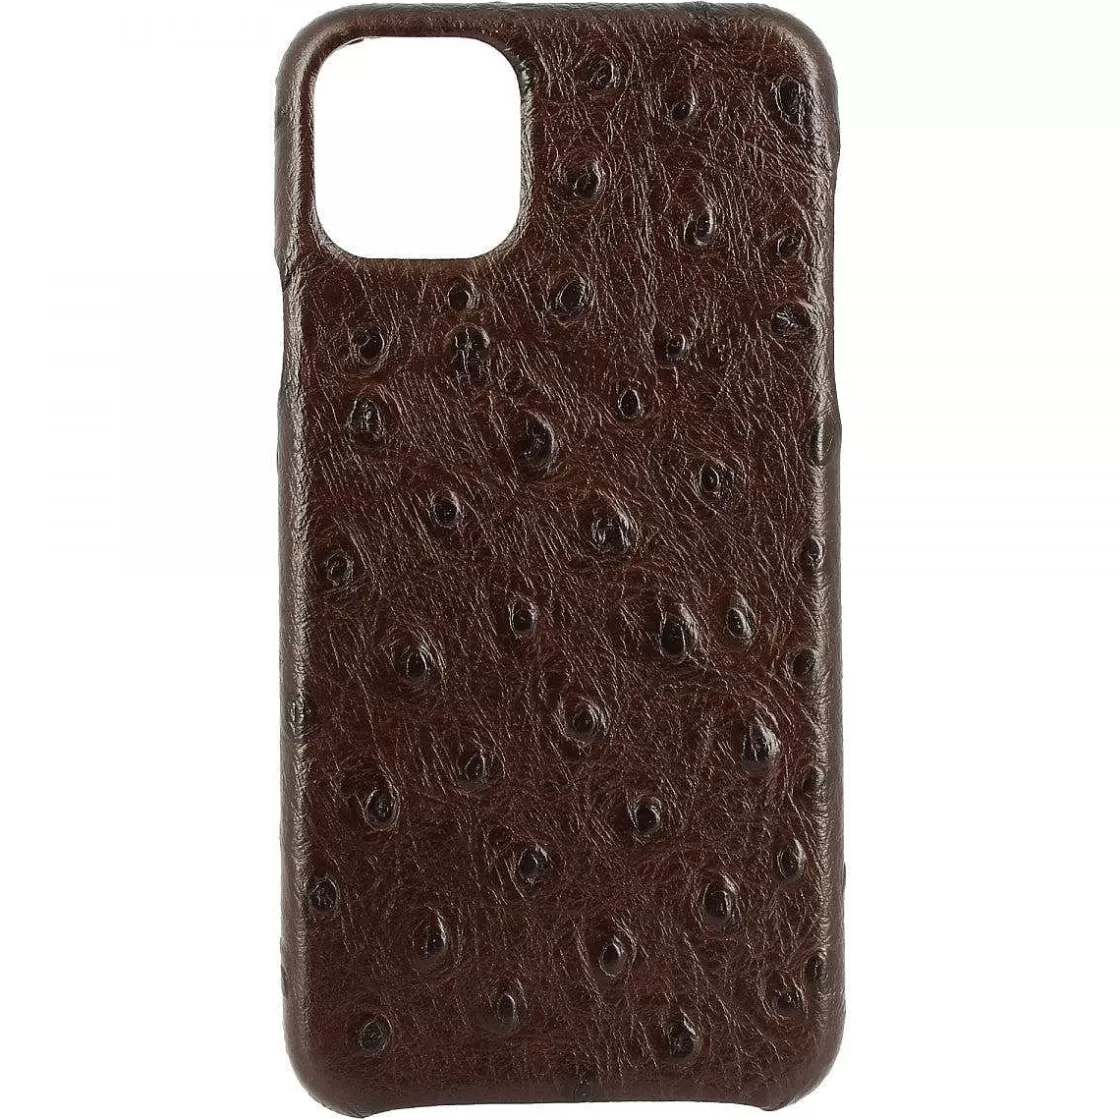 Leonardo Iphone Case In Brown Ostrich Printed Leather Best